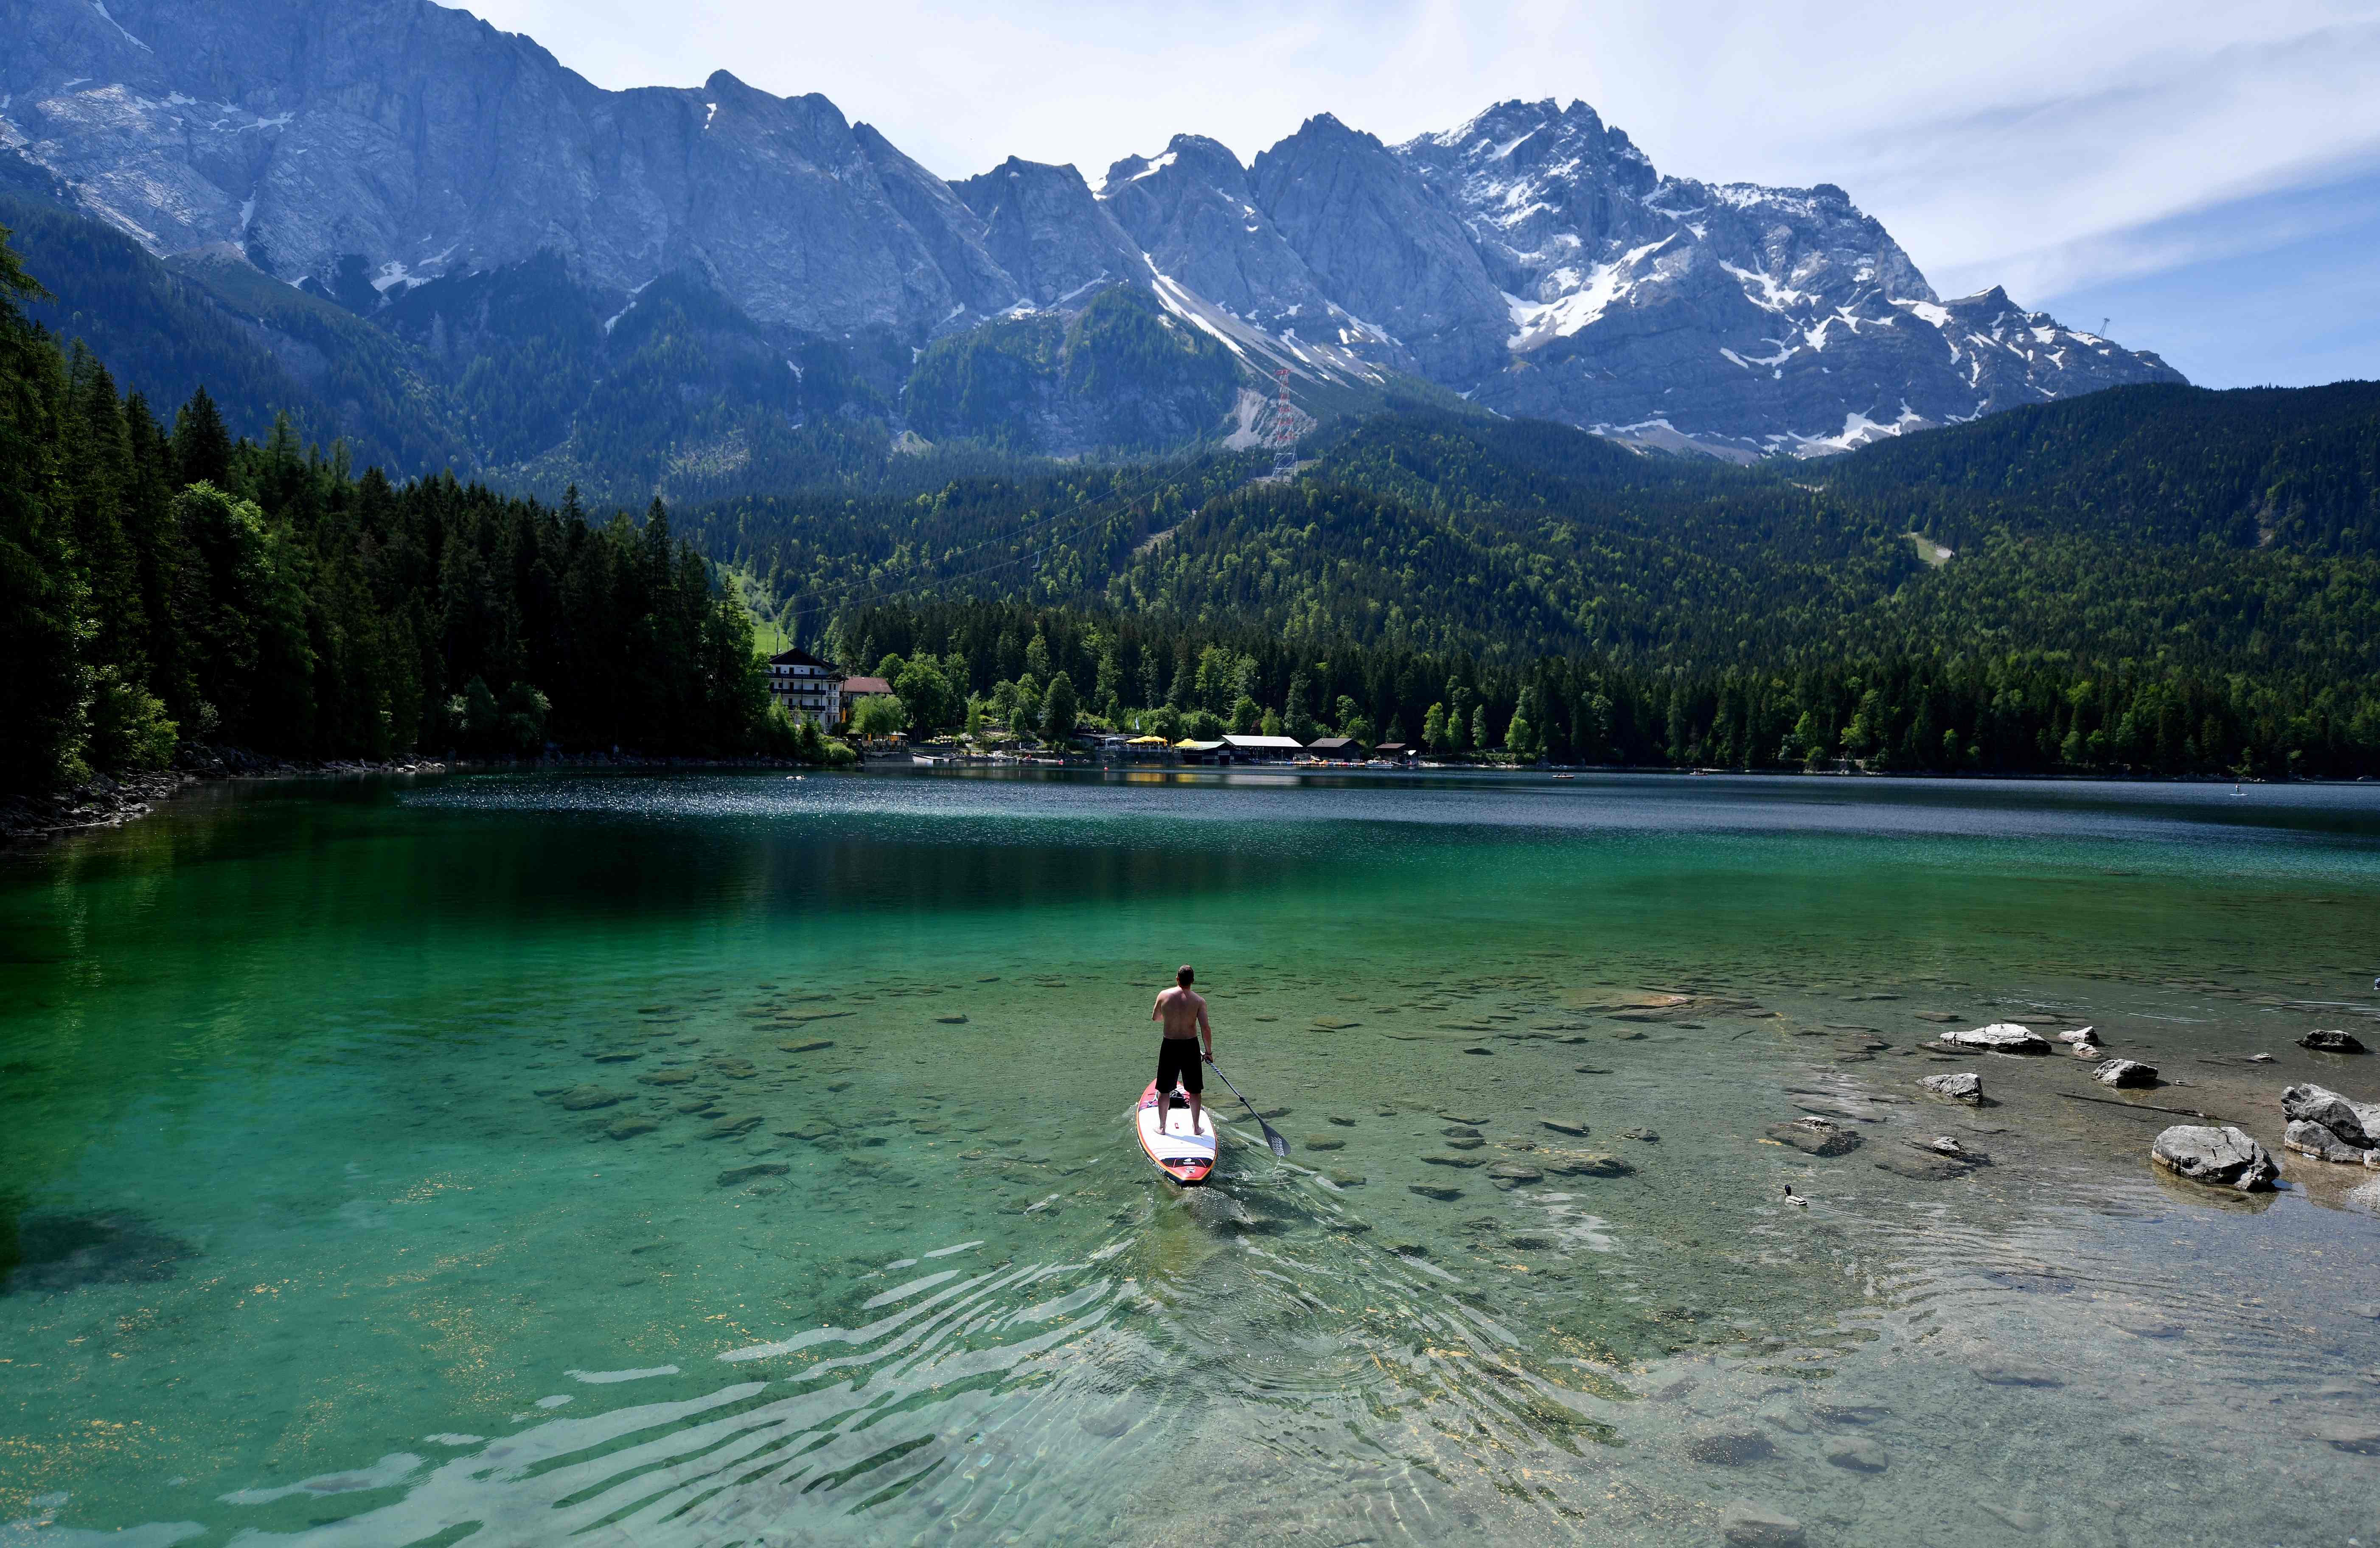 A man uses a paddle board on the Eibsee lake on May 25, 2018 in Grainau, Germany.